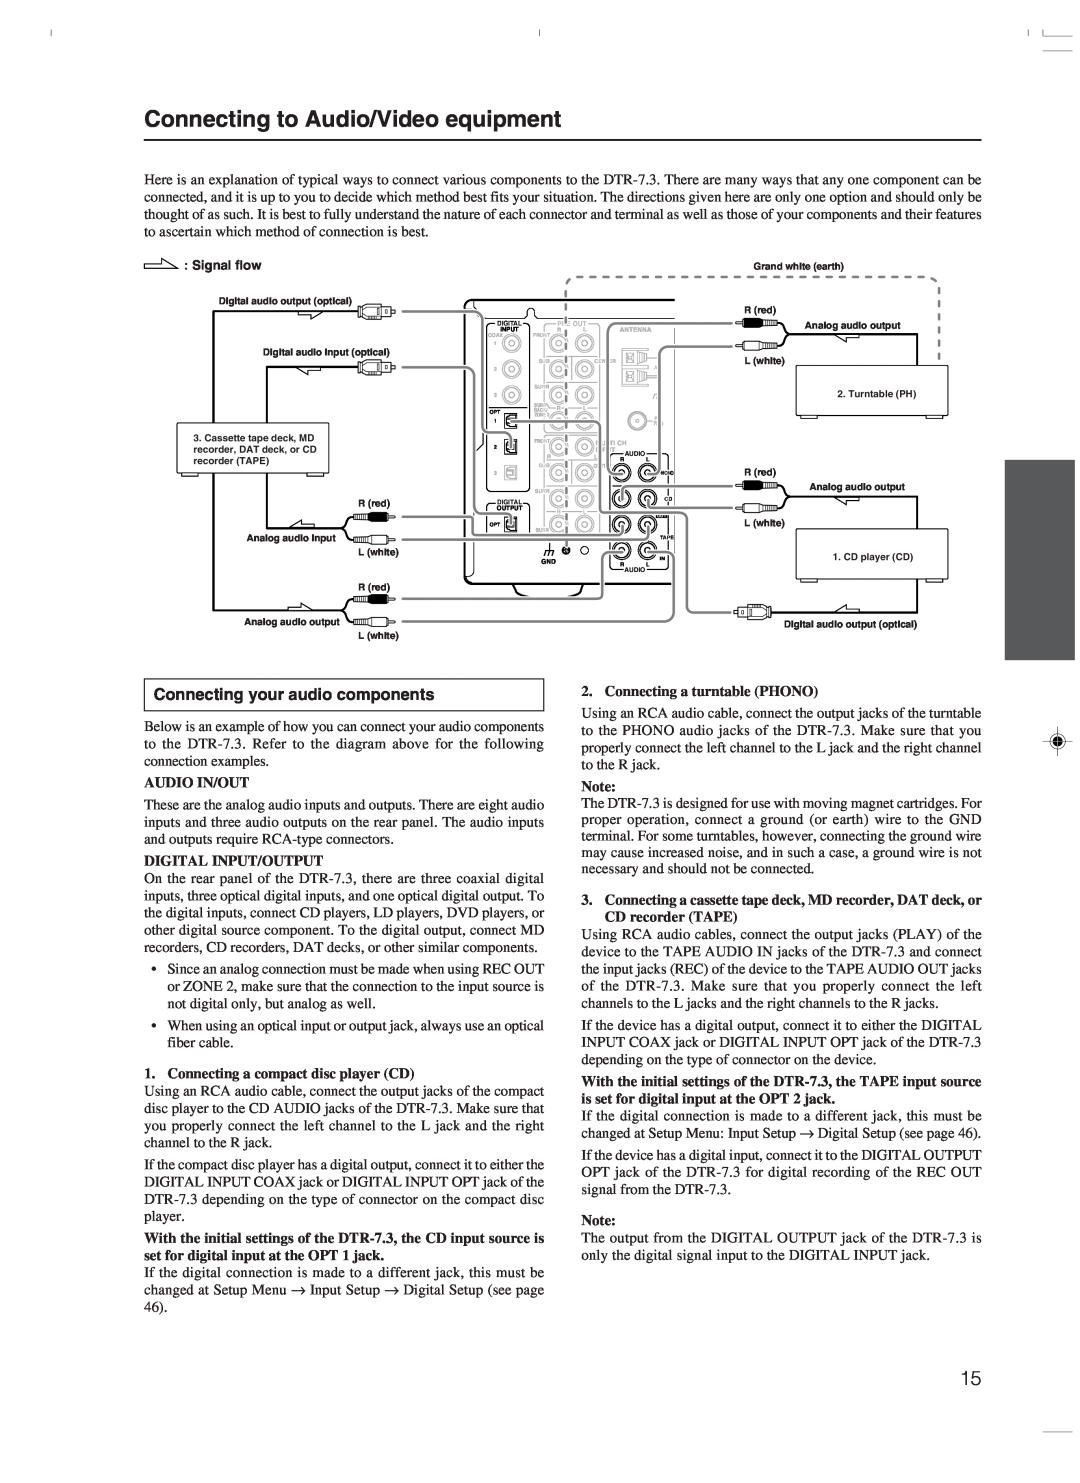 Integra DTR-7.3 instruction manual Connecting to Audio/Video equipment, Connecting your audio components 